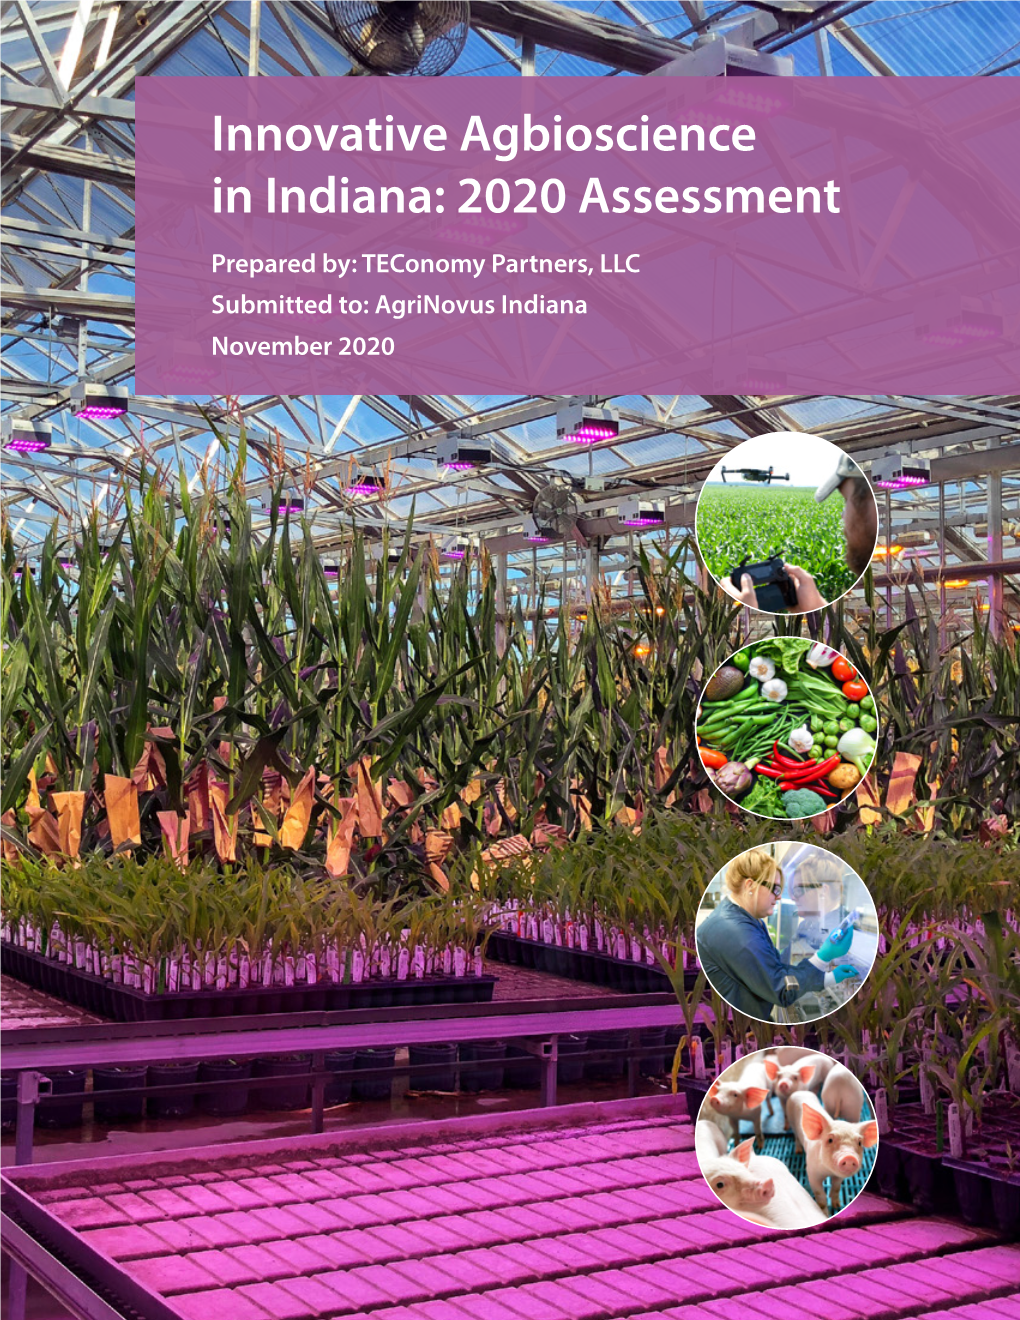 Innovative Agbioscience in Indiana: 2020 Assessment